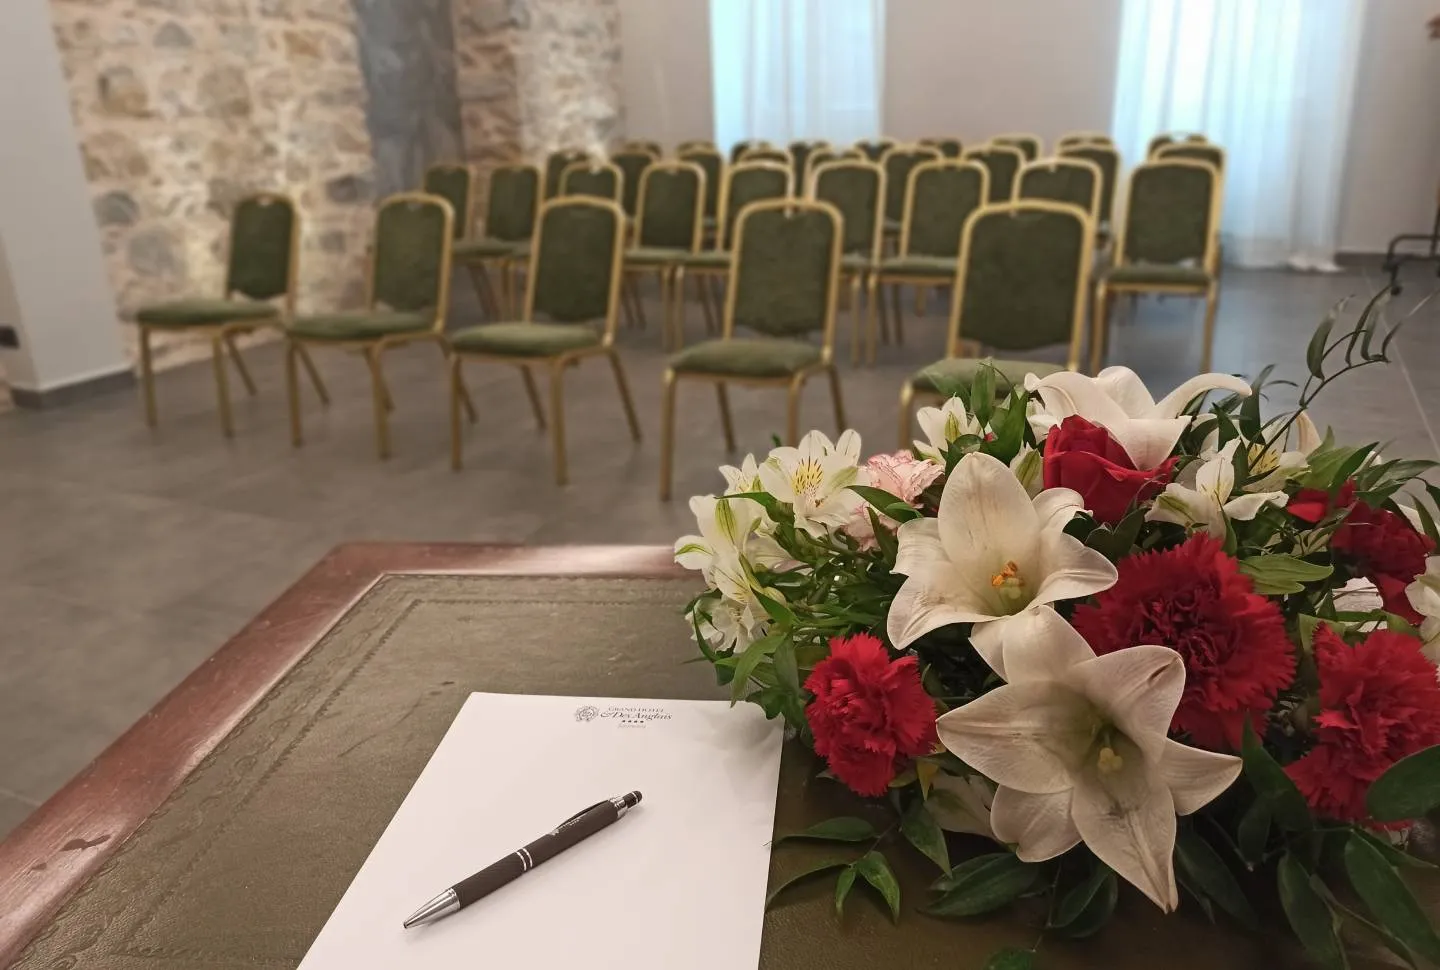 Meeting rooms in Sanremo for meetings and conferences